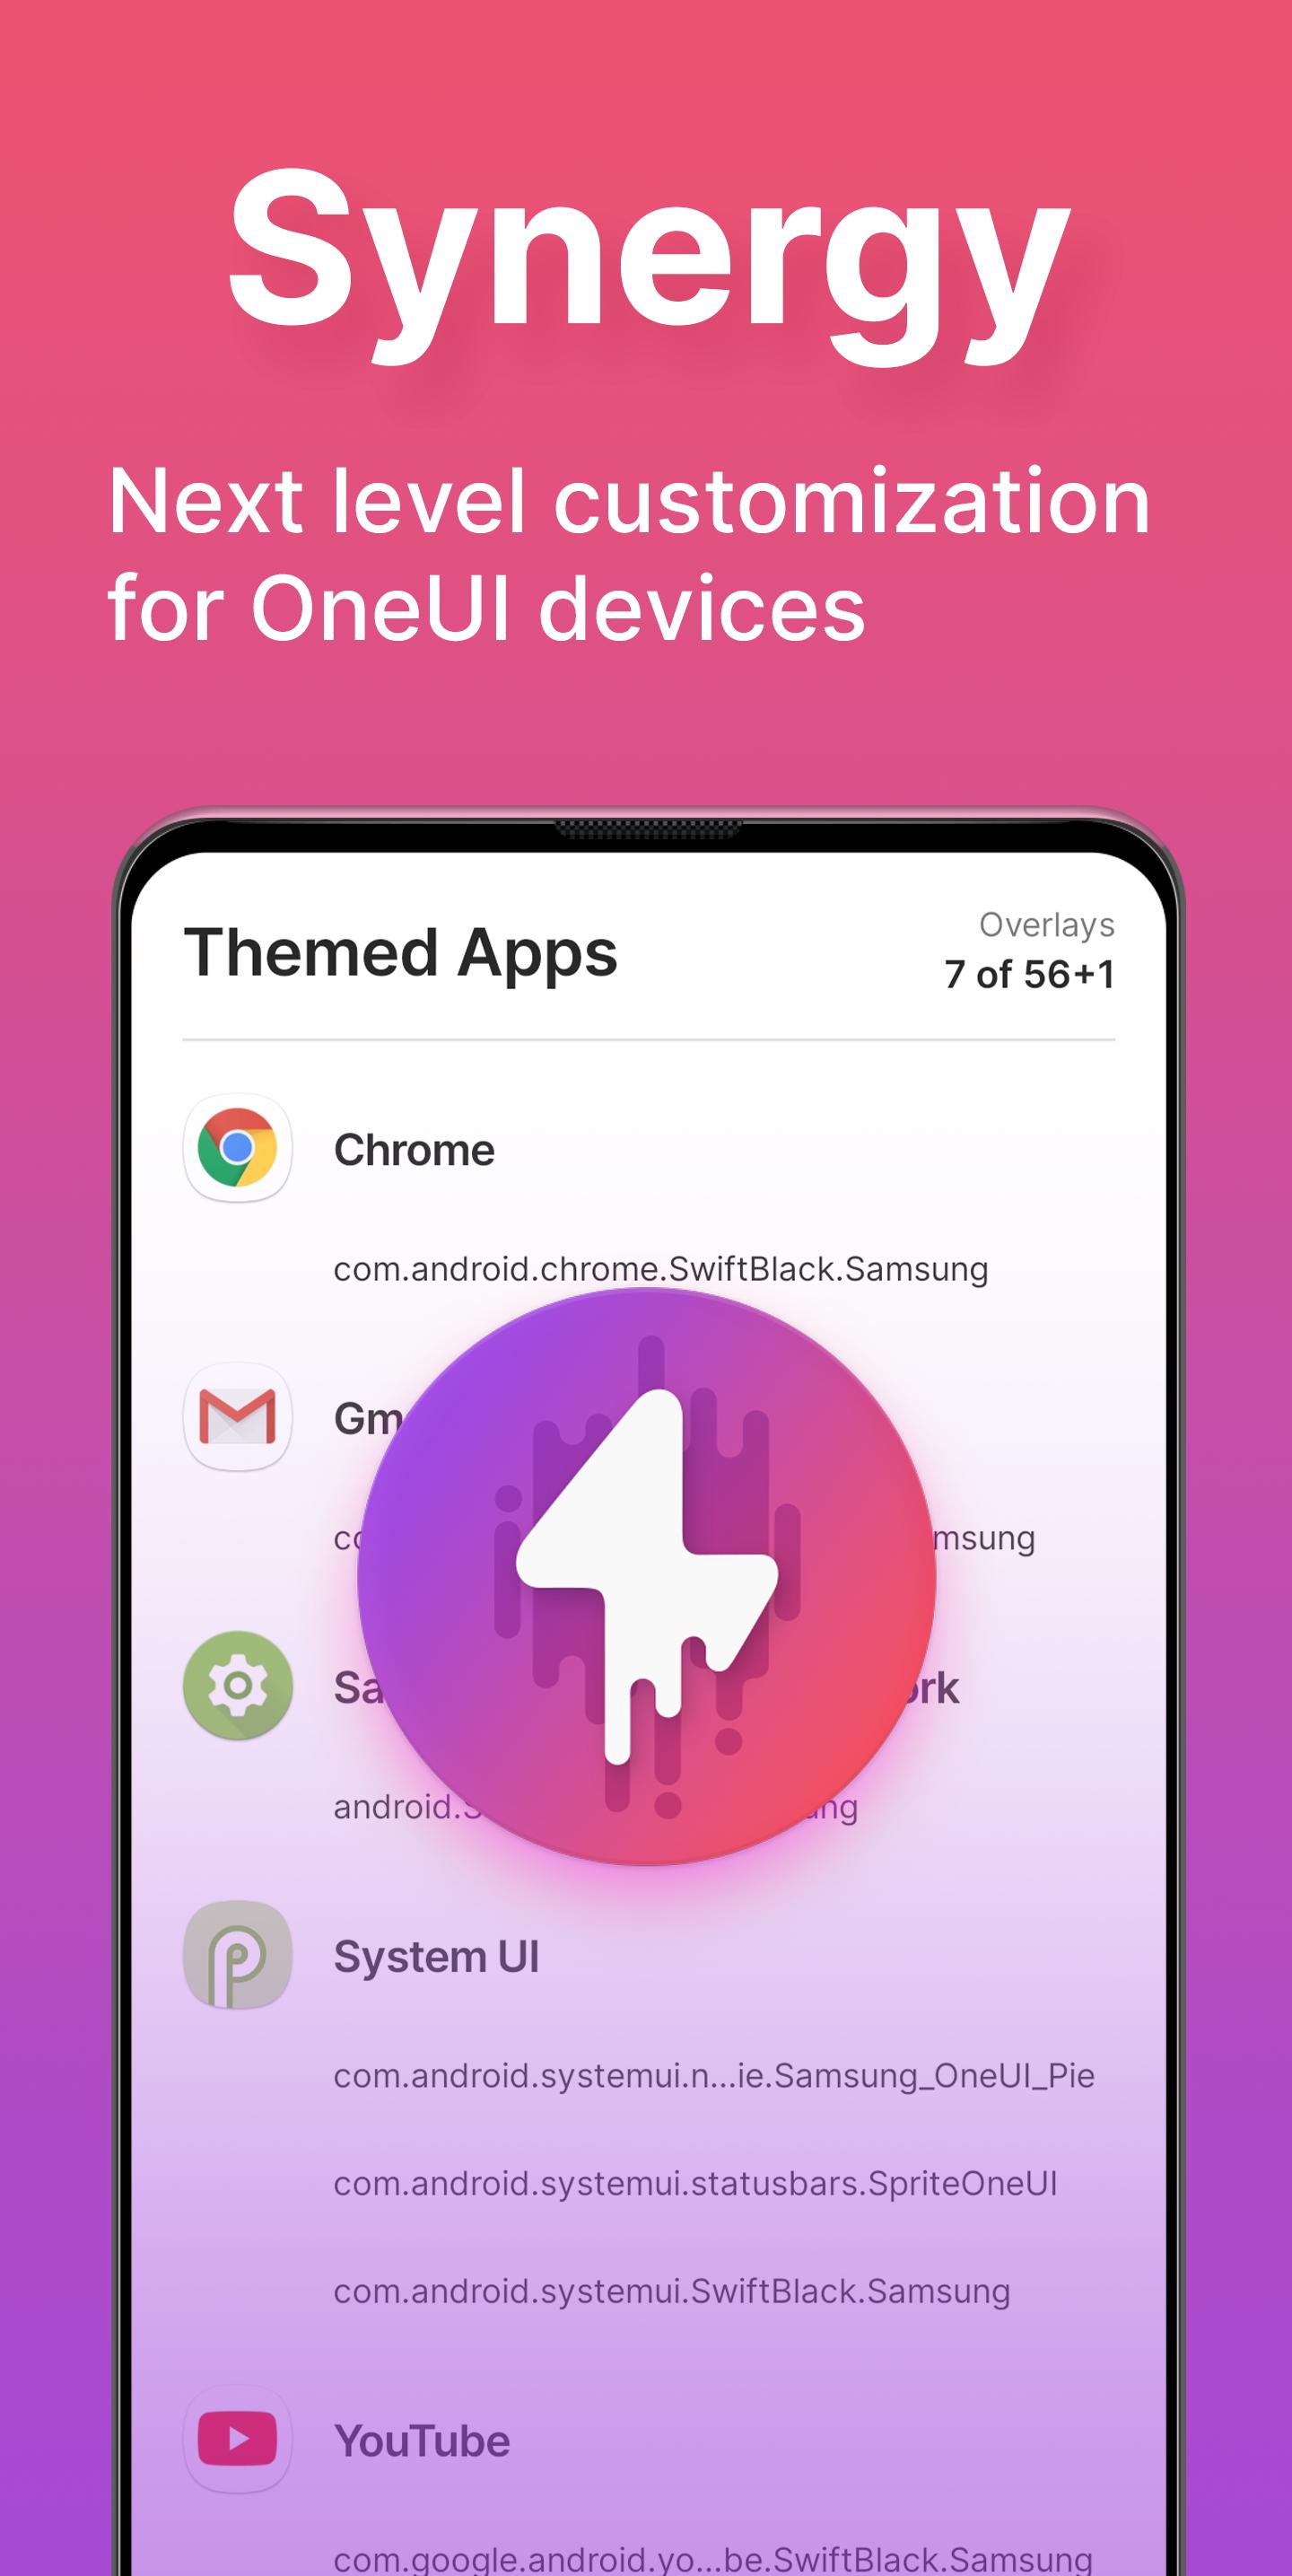 Synergy app. Synergy. Compiler html APK PC. ONEUI shortcuts download. Oneui 6.0